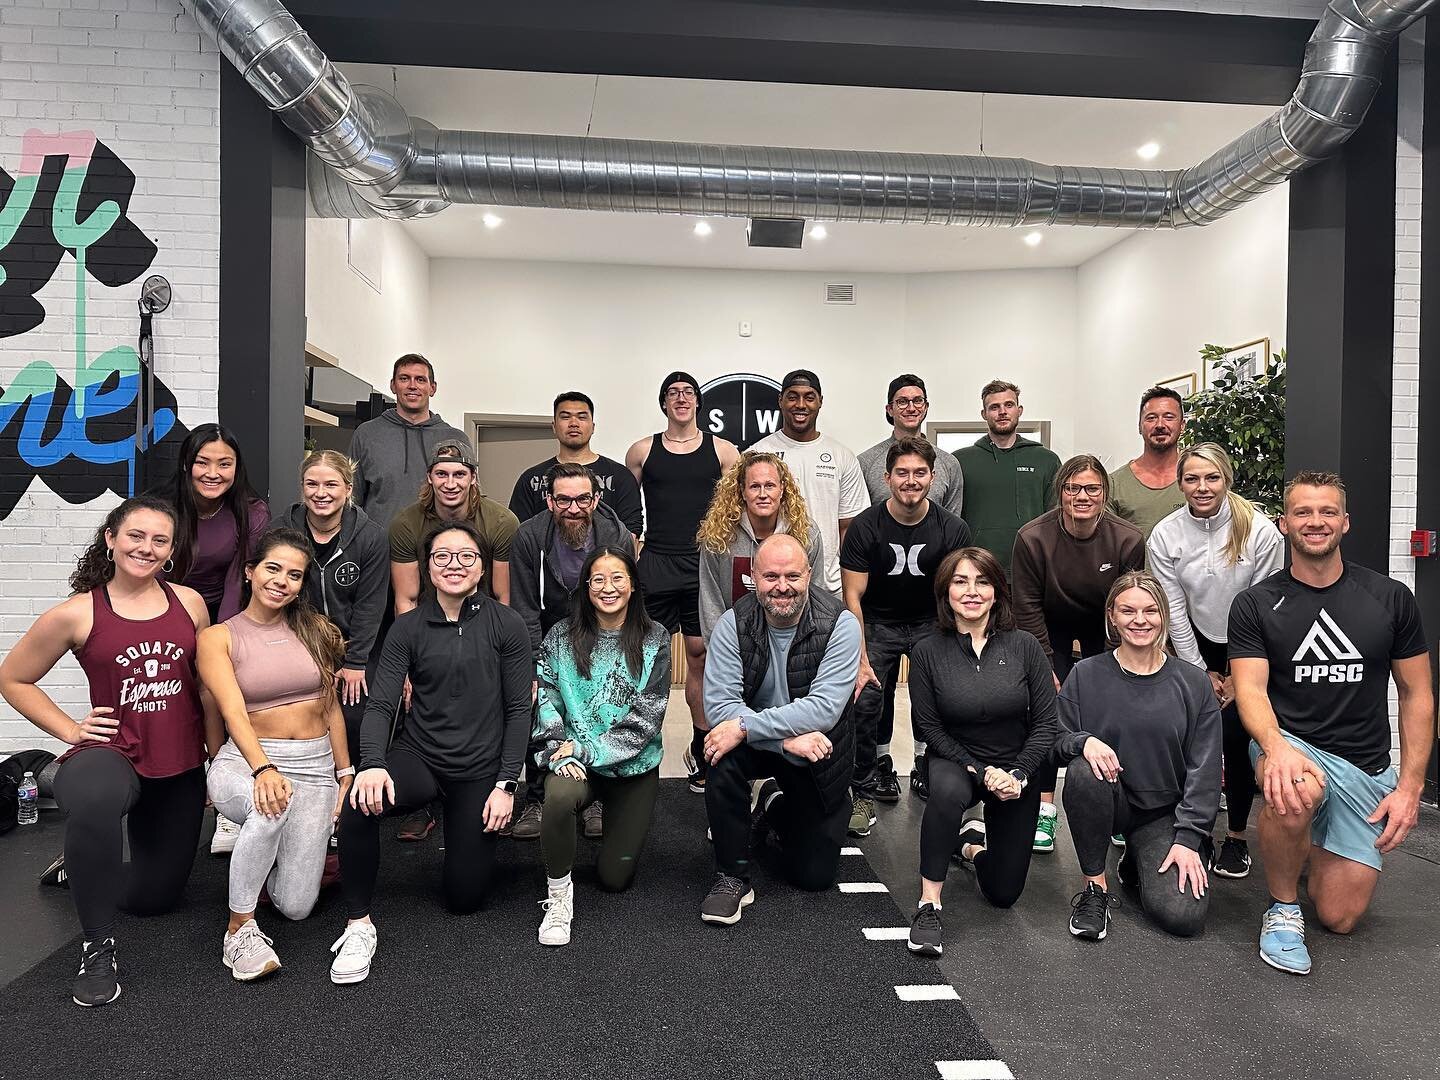 Had a fantastic weekend at the Pain-Free Performance Specialist Certification 💪🏻

Got to meet some awesome people in the industry and get hands on experience applying a variety of different cues and concepts. Couldn&rsquo;t recommend this course en